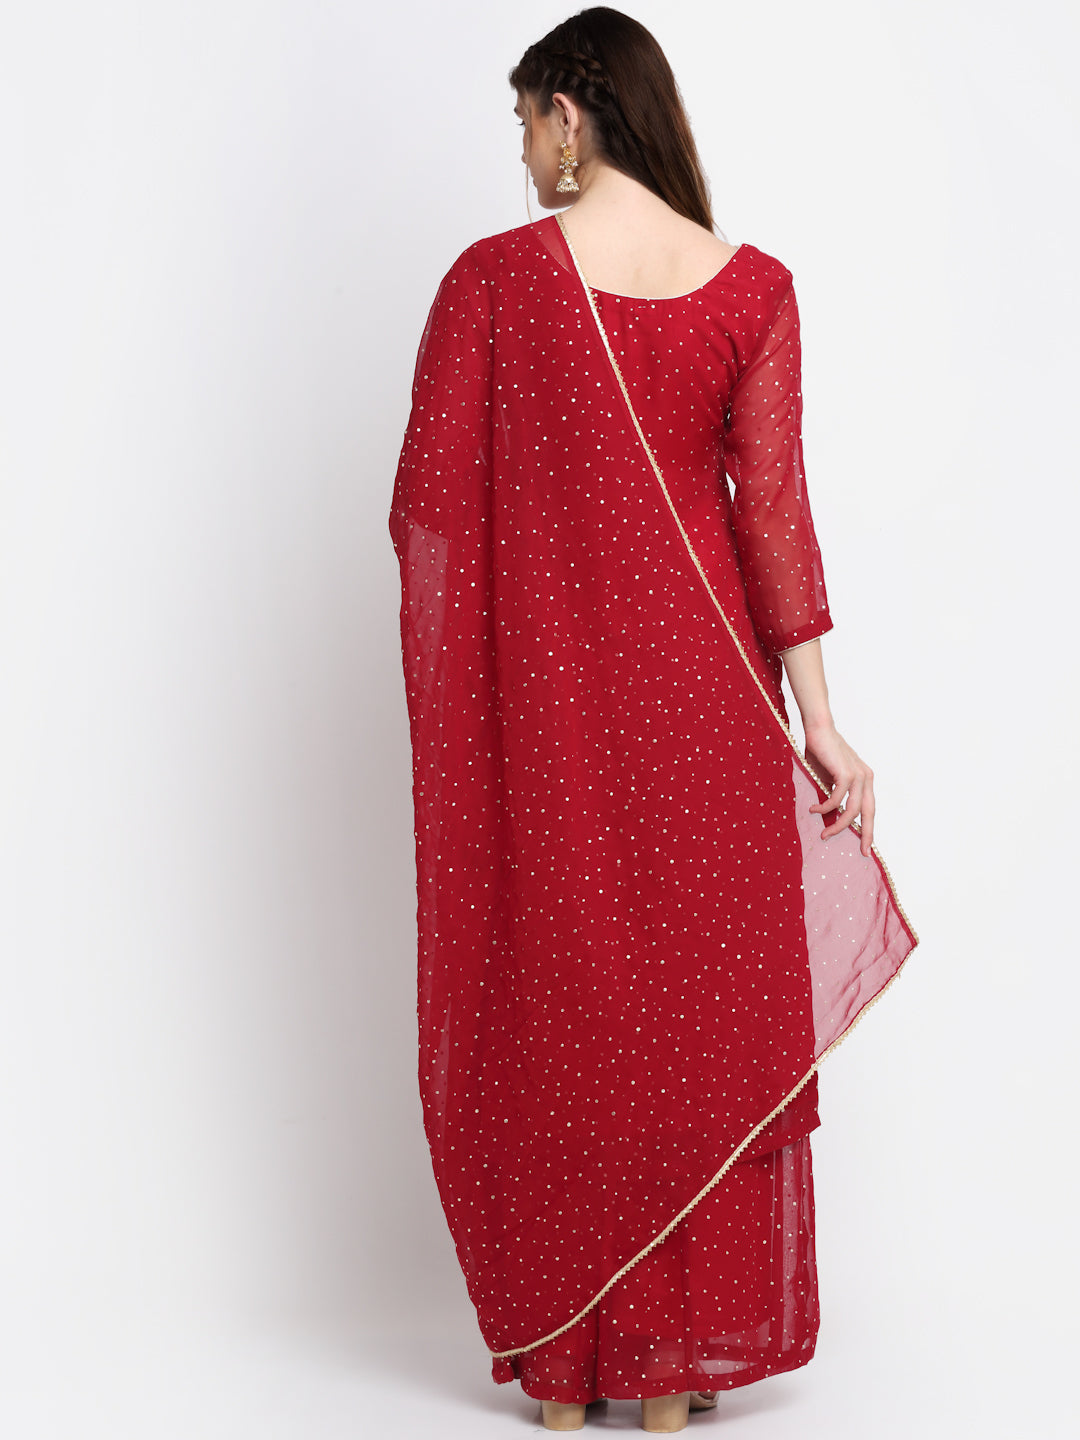 Women's Sparkling Red Hues Georgette Foil Straight Kurti With Palazzo And Dupatta - Anokherang